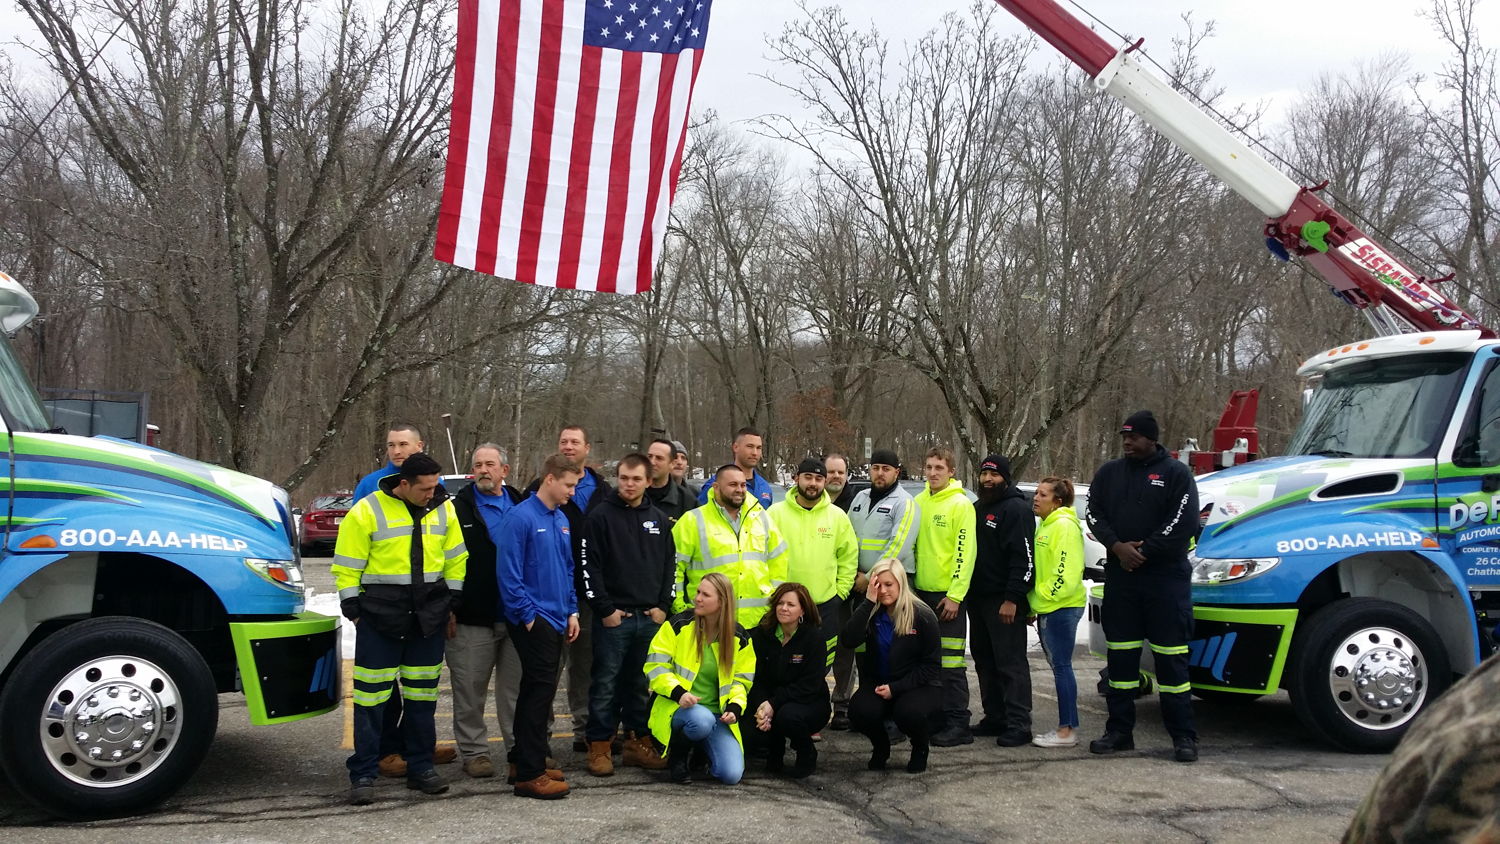 The Rempfer family and friends in front of the tow truck with Lung Cancer Foundation of America signage